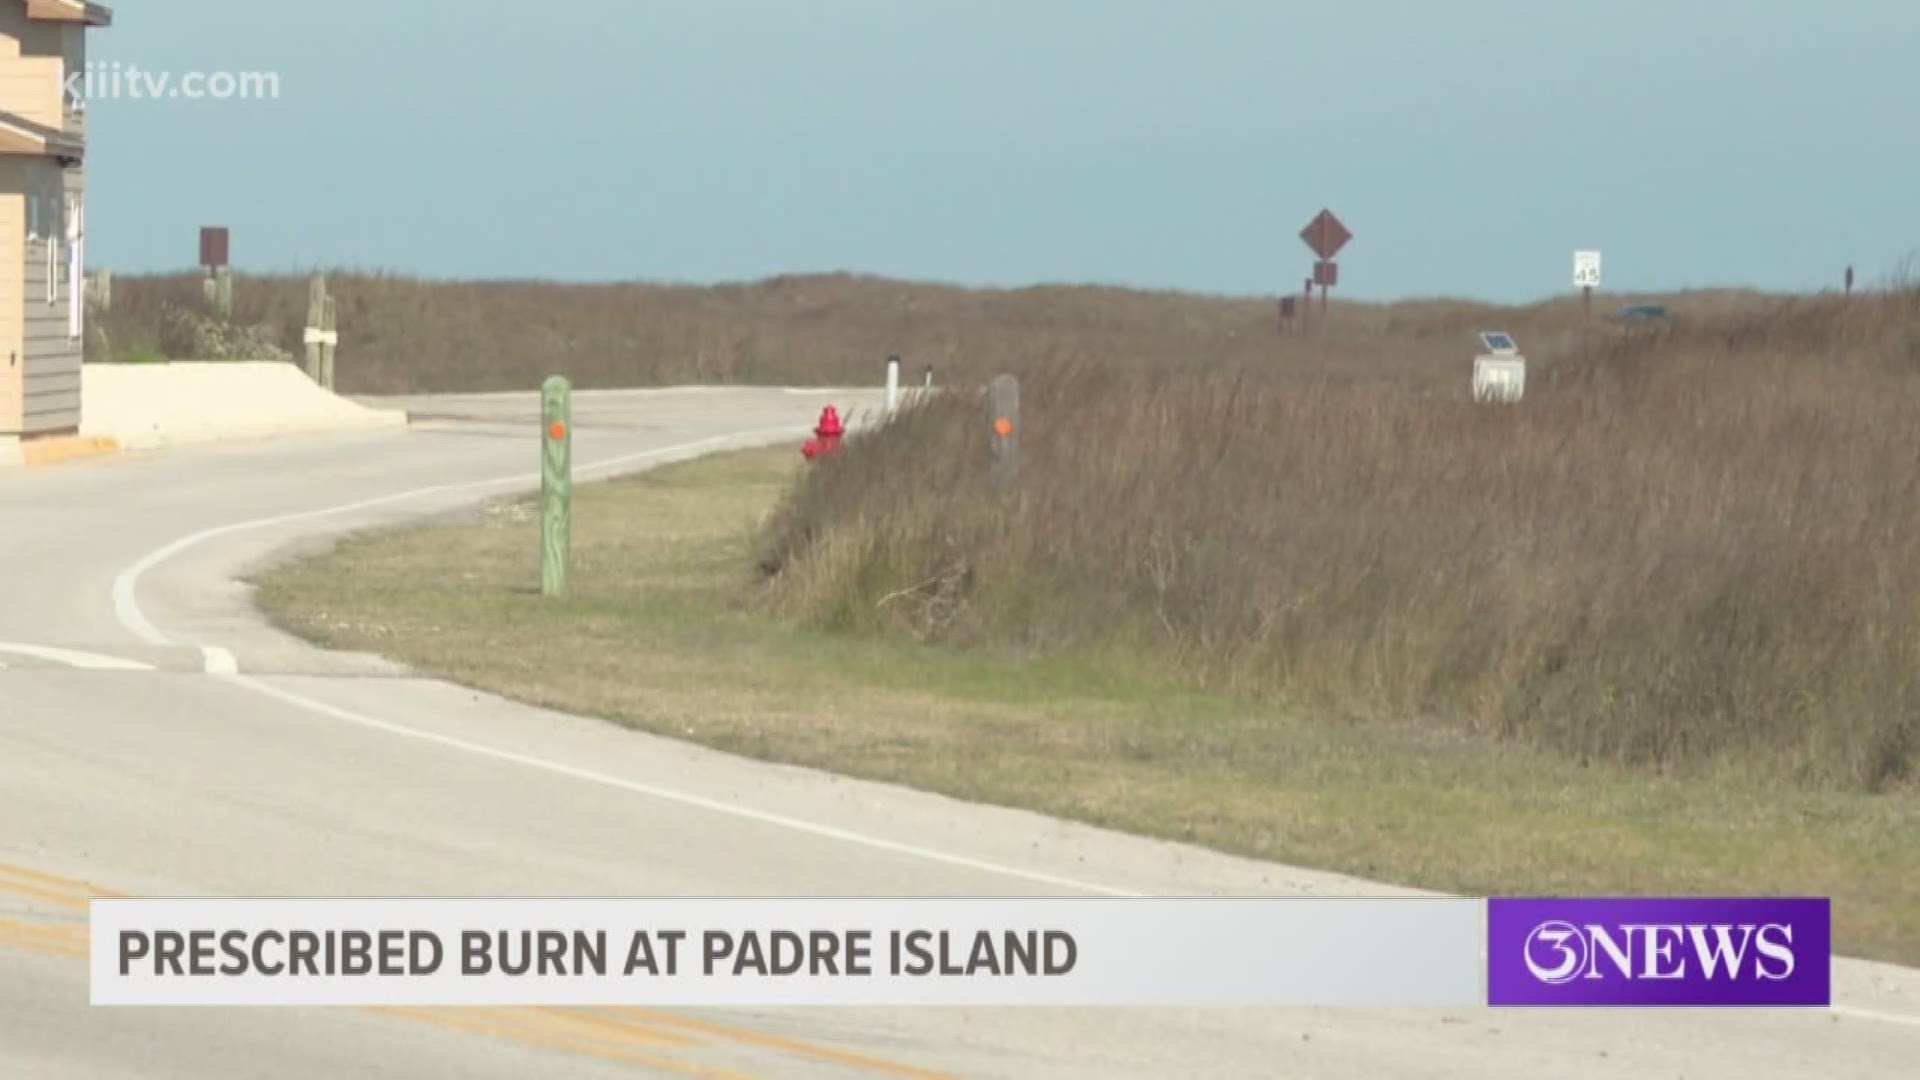 A prescribed burn is set to begin Friday until Tuesday on the Padre Island National Seashore.